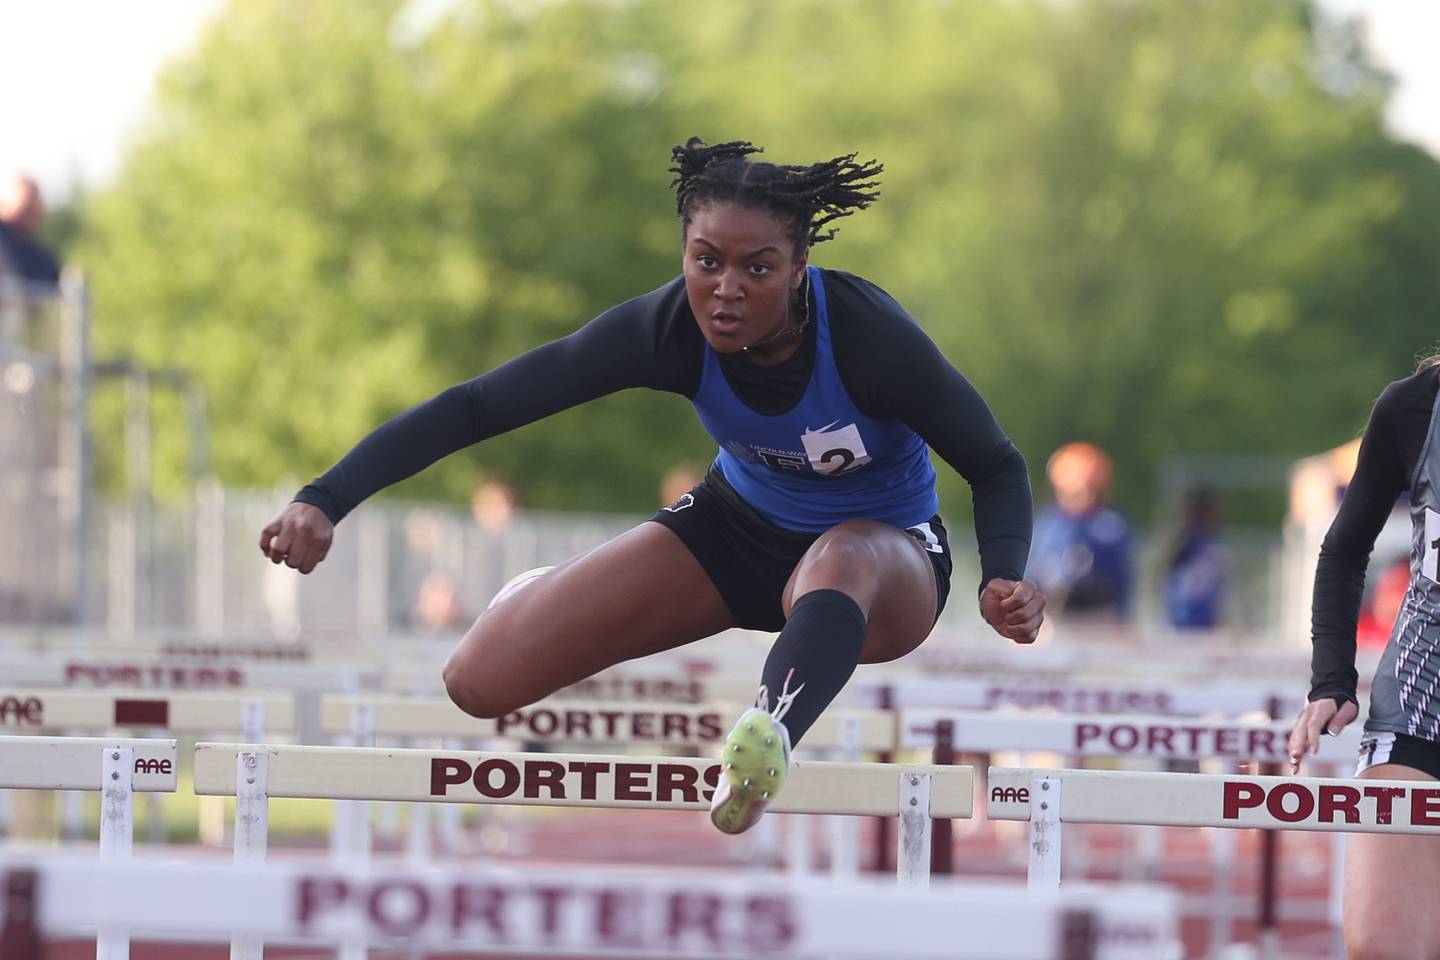 Lincoln-Way East’s Kyra Hayden took fourth and qualified for state in the 100-meter hurdles at the Class 3A Lockport Sectional in May in Lockport.